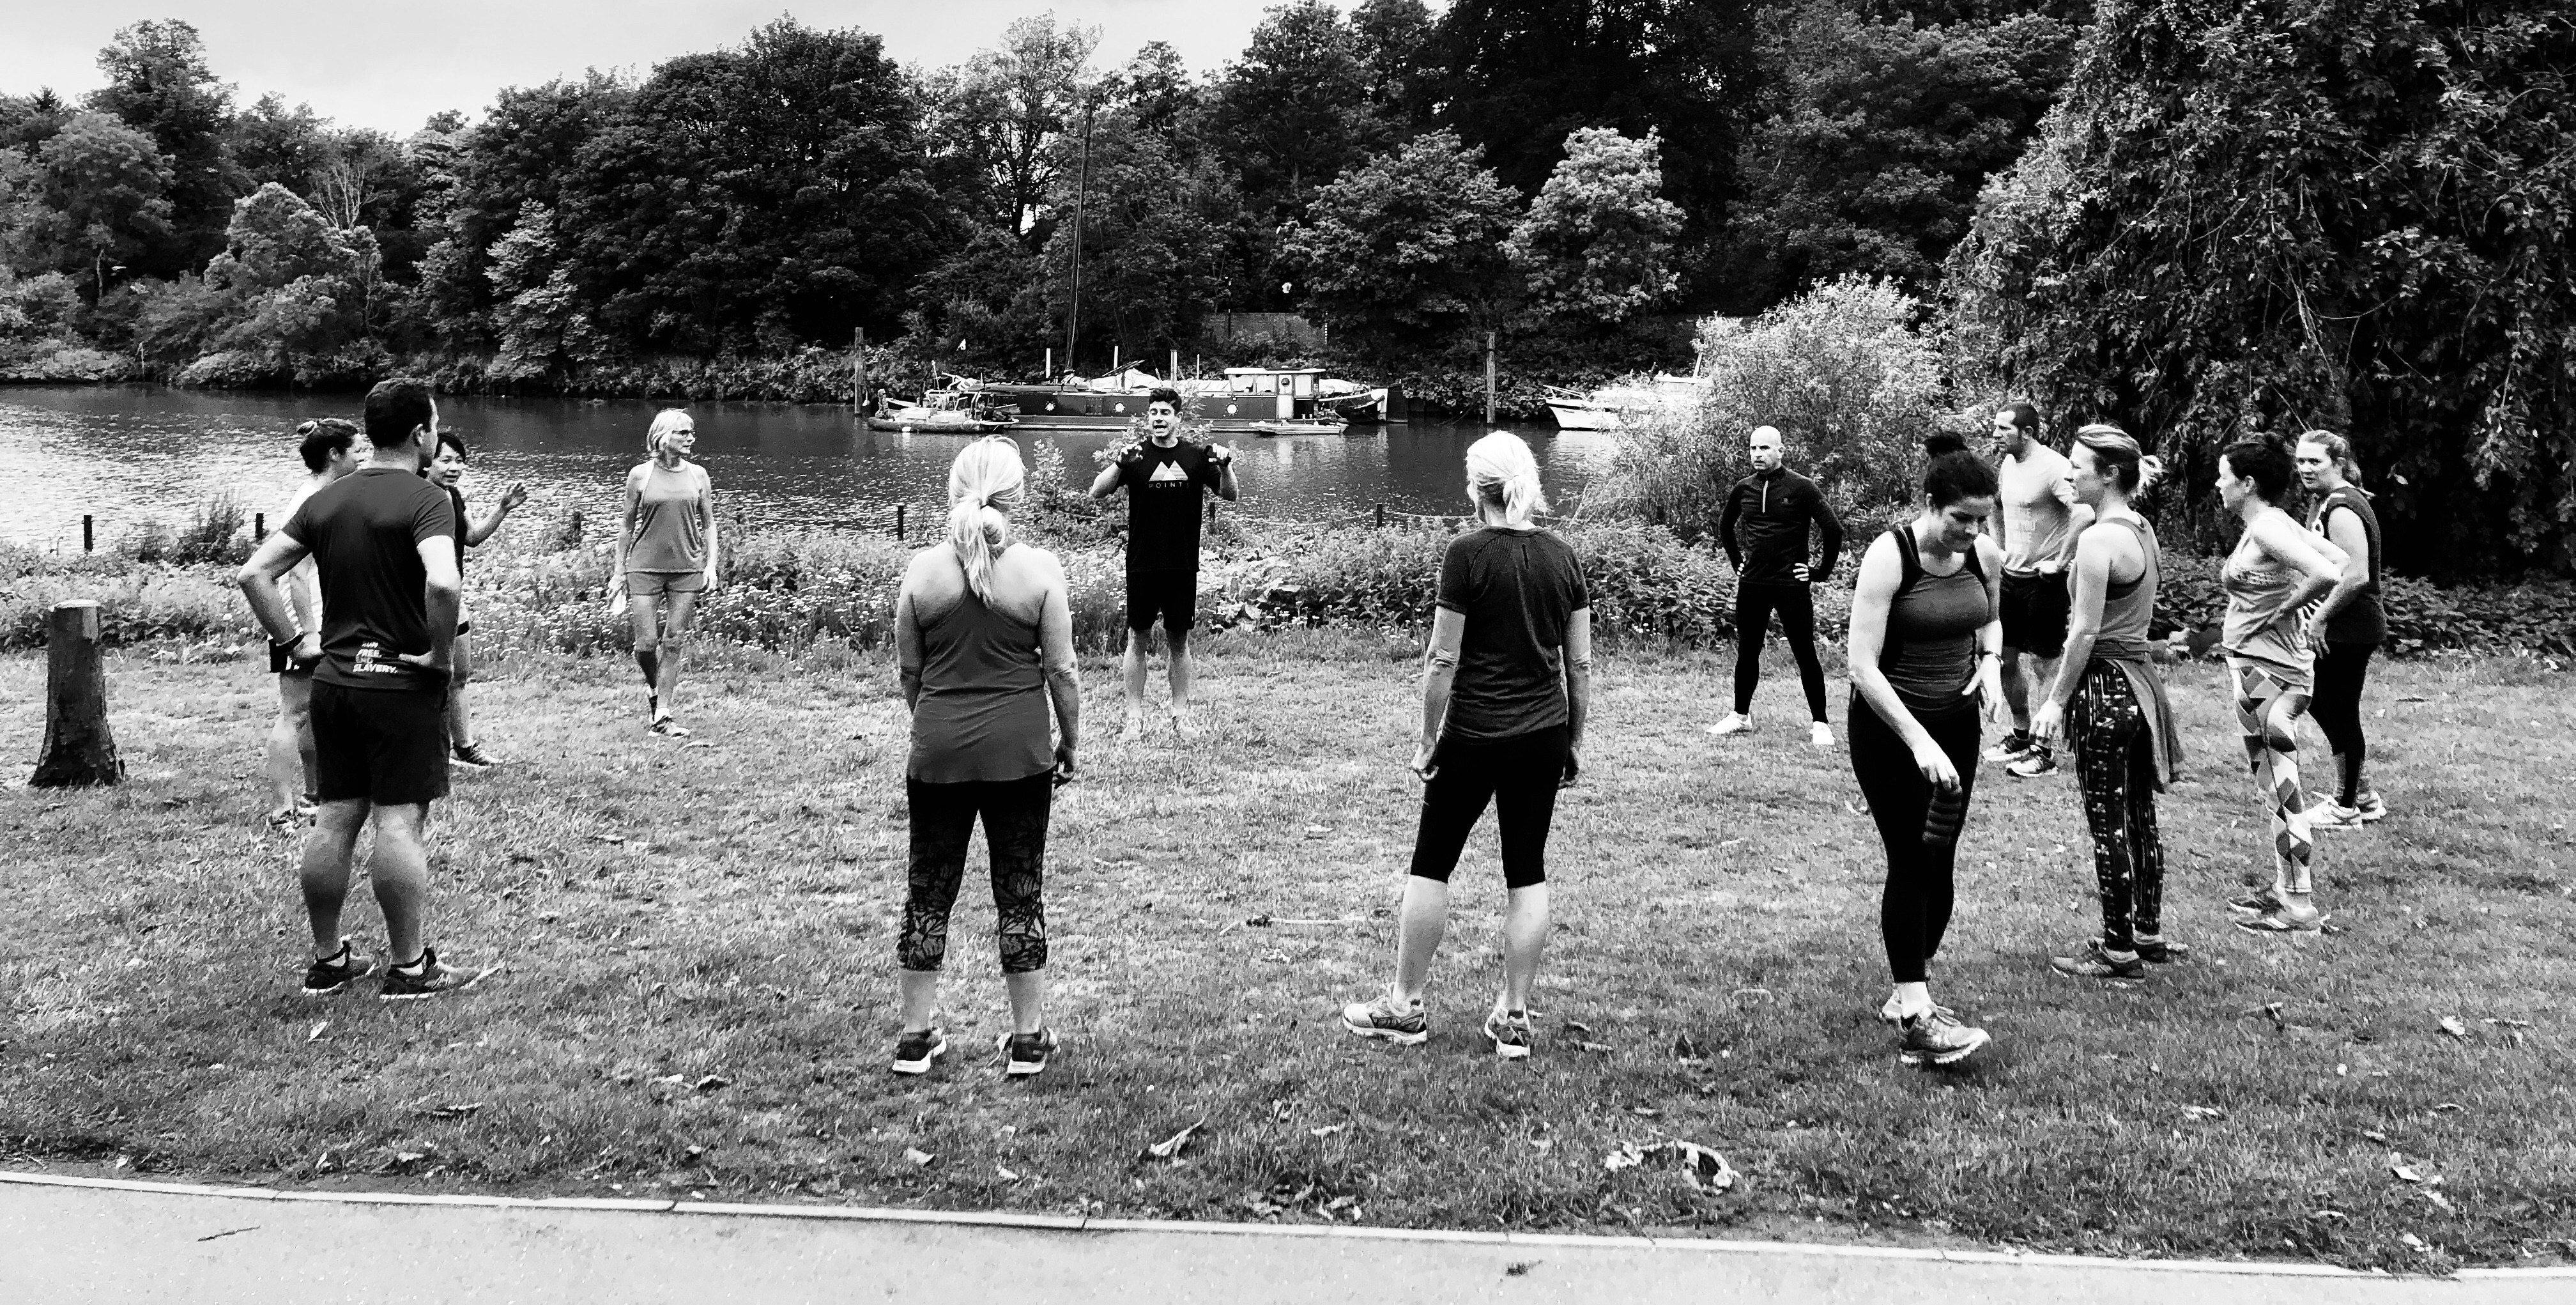 HIIT+CHILL+CHAT mini-retreat in Richmond, September 2018